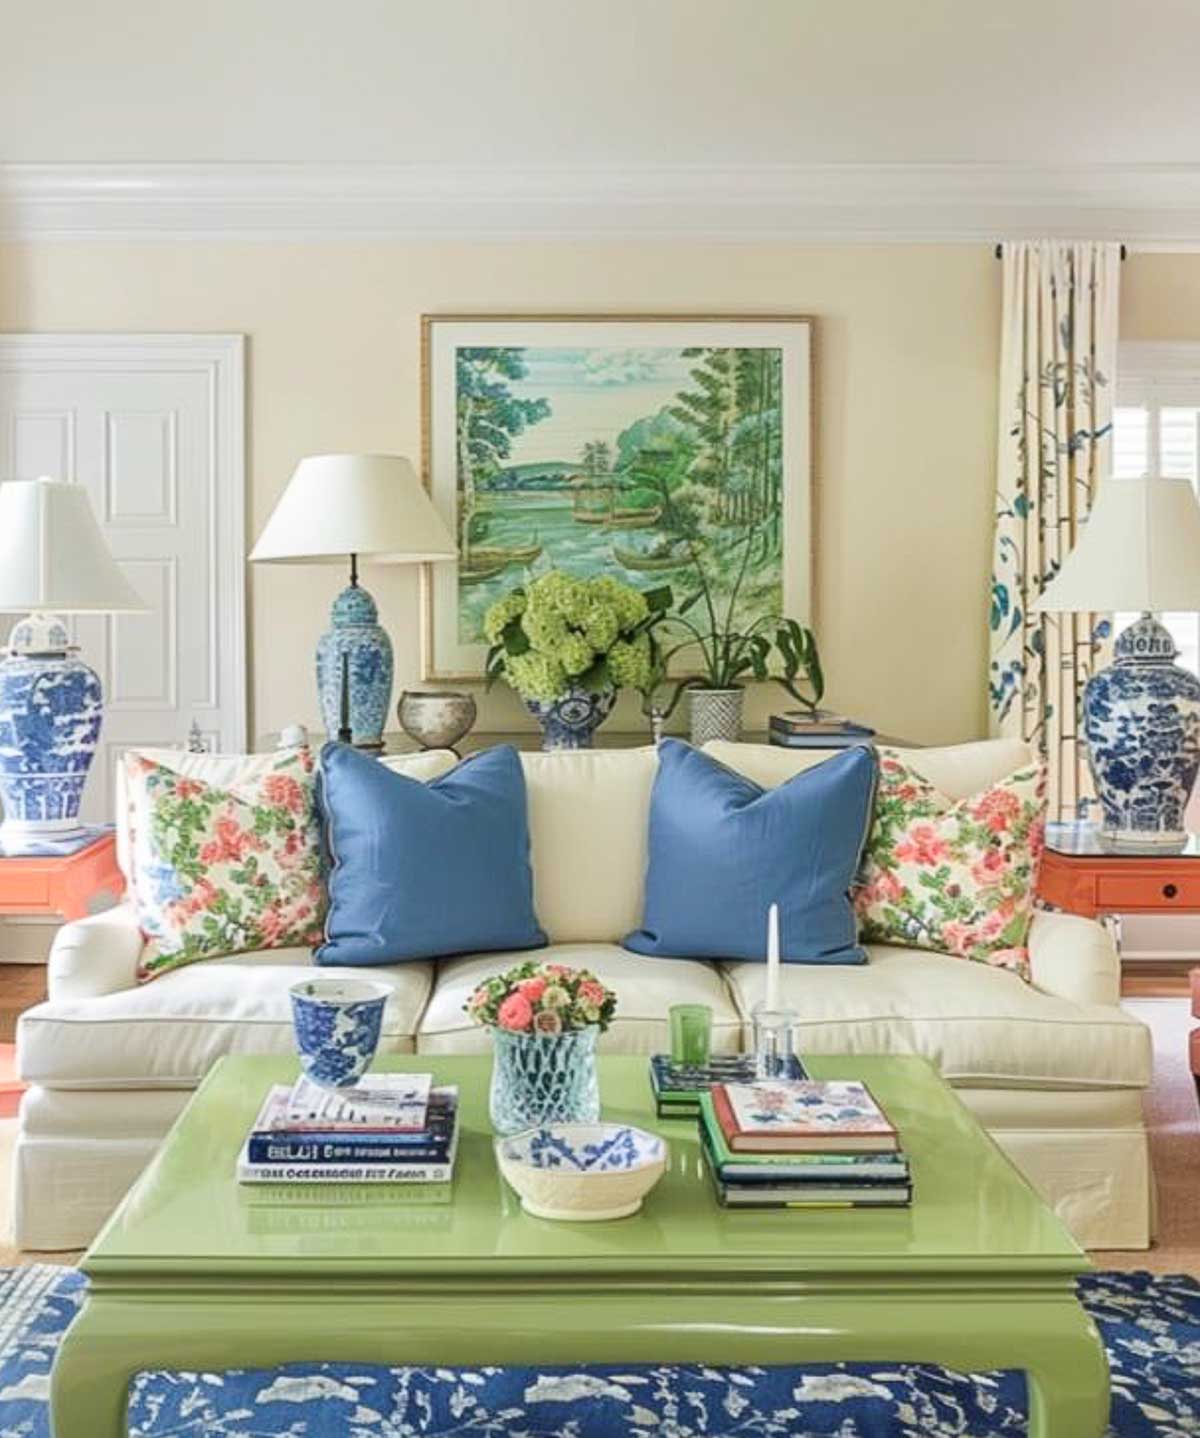 a traditionally furnished living room with a color palette of blue and white with coral accents